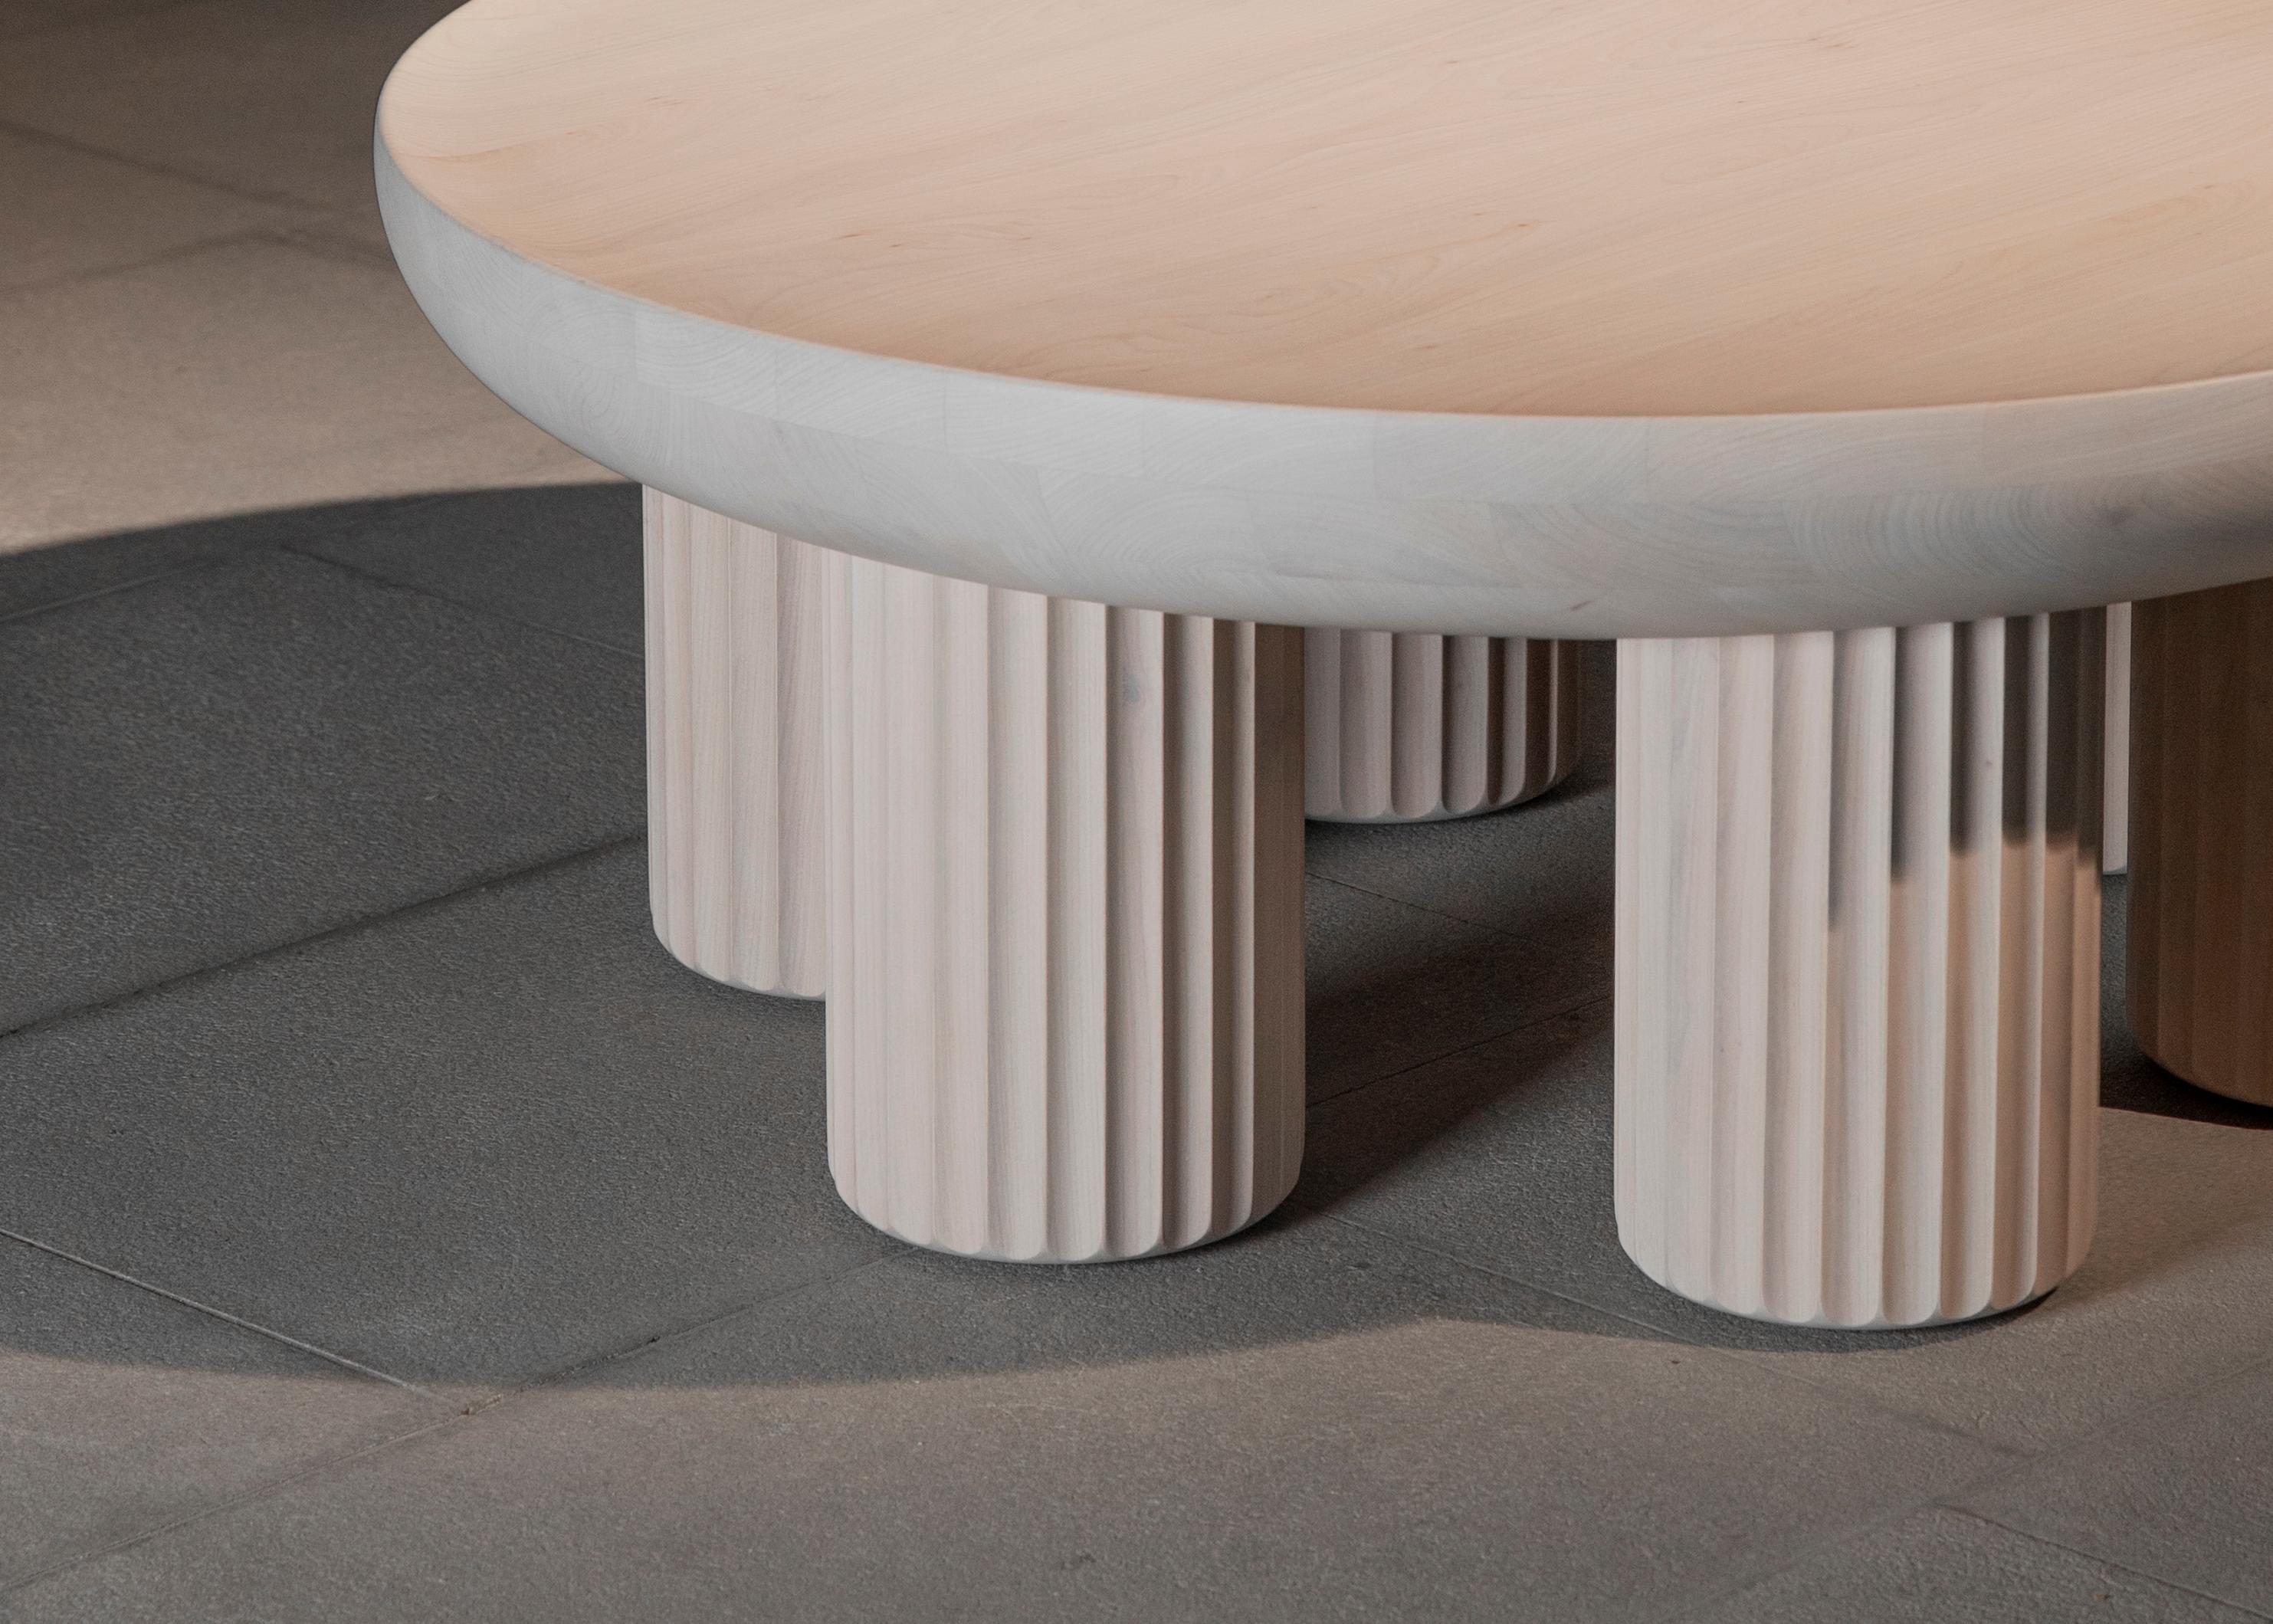 Kalokagathos table is freely inspired by the aesthetics of ancient Greece. This sculptural table is the part of the Eclecticism collection, in which I pursue the relation between history and the present. Every piece from the collection is loosely